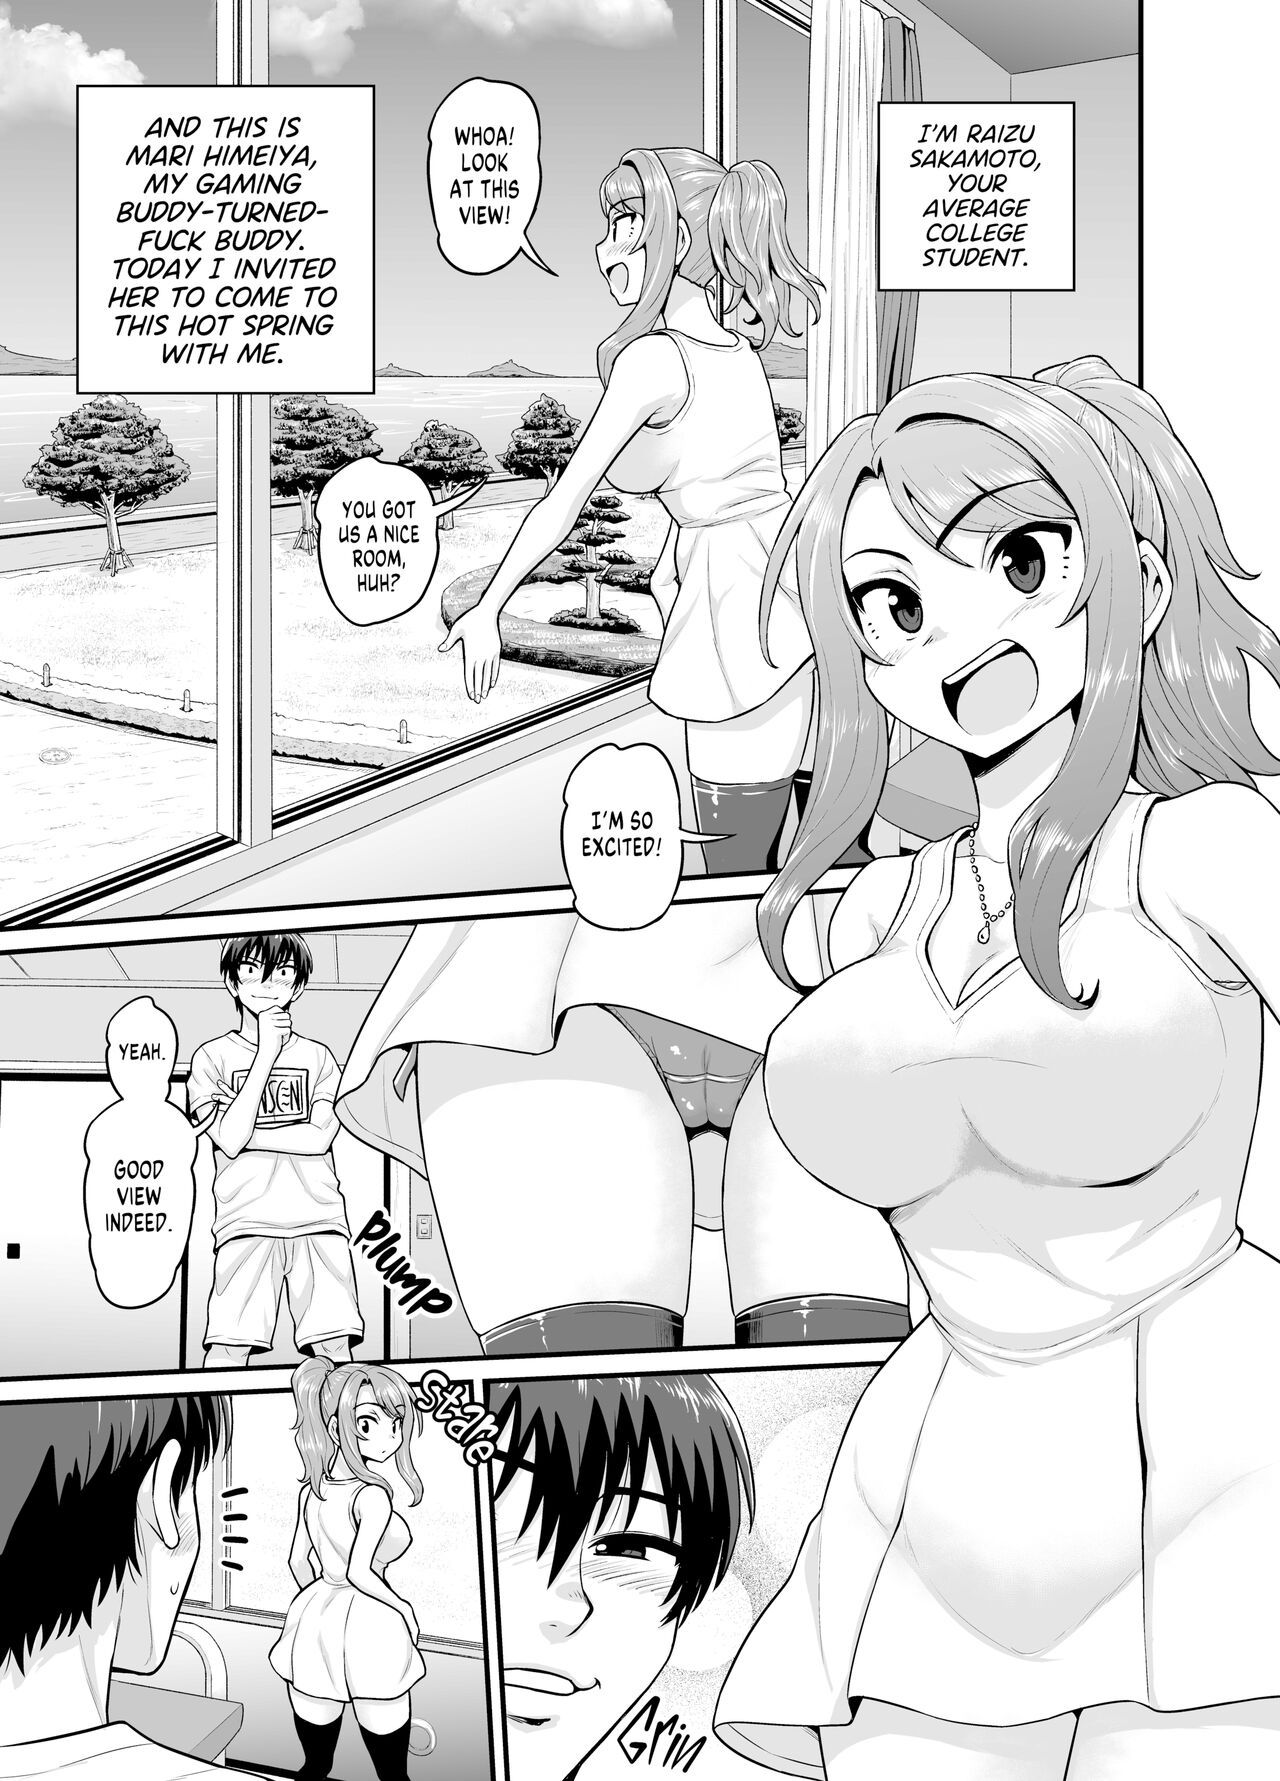 Getting it On With Your Gaming Buddy at the Hot Spring Porn Comic english 02